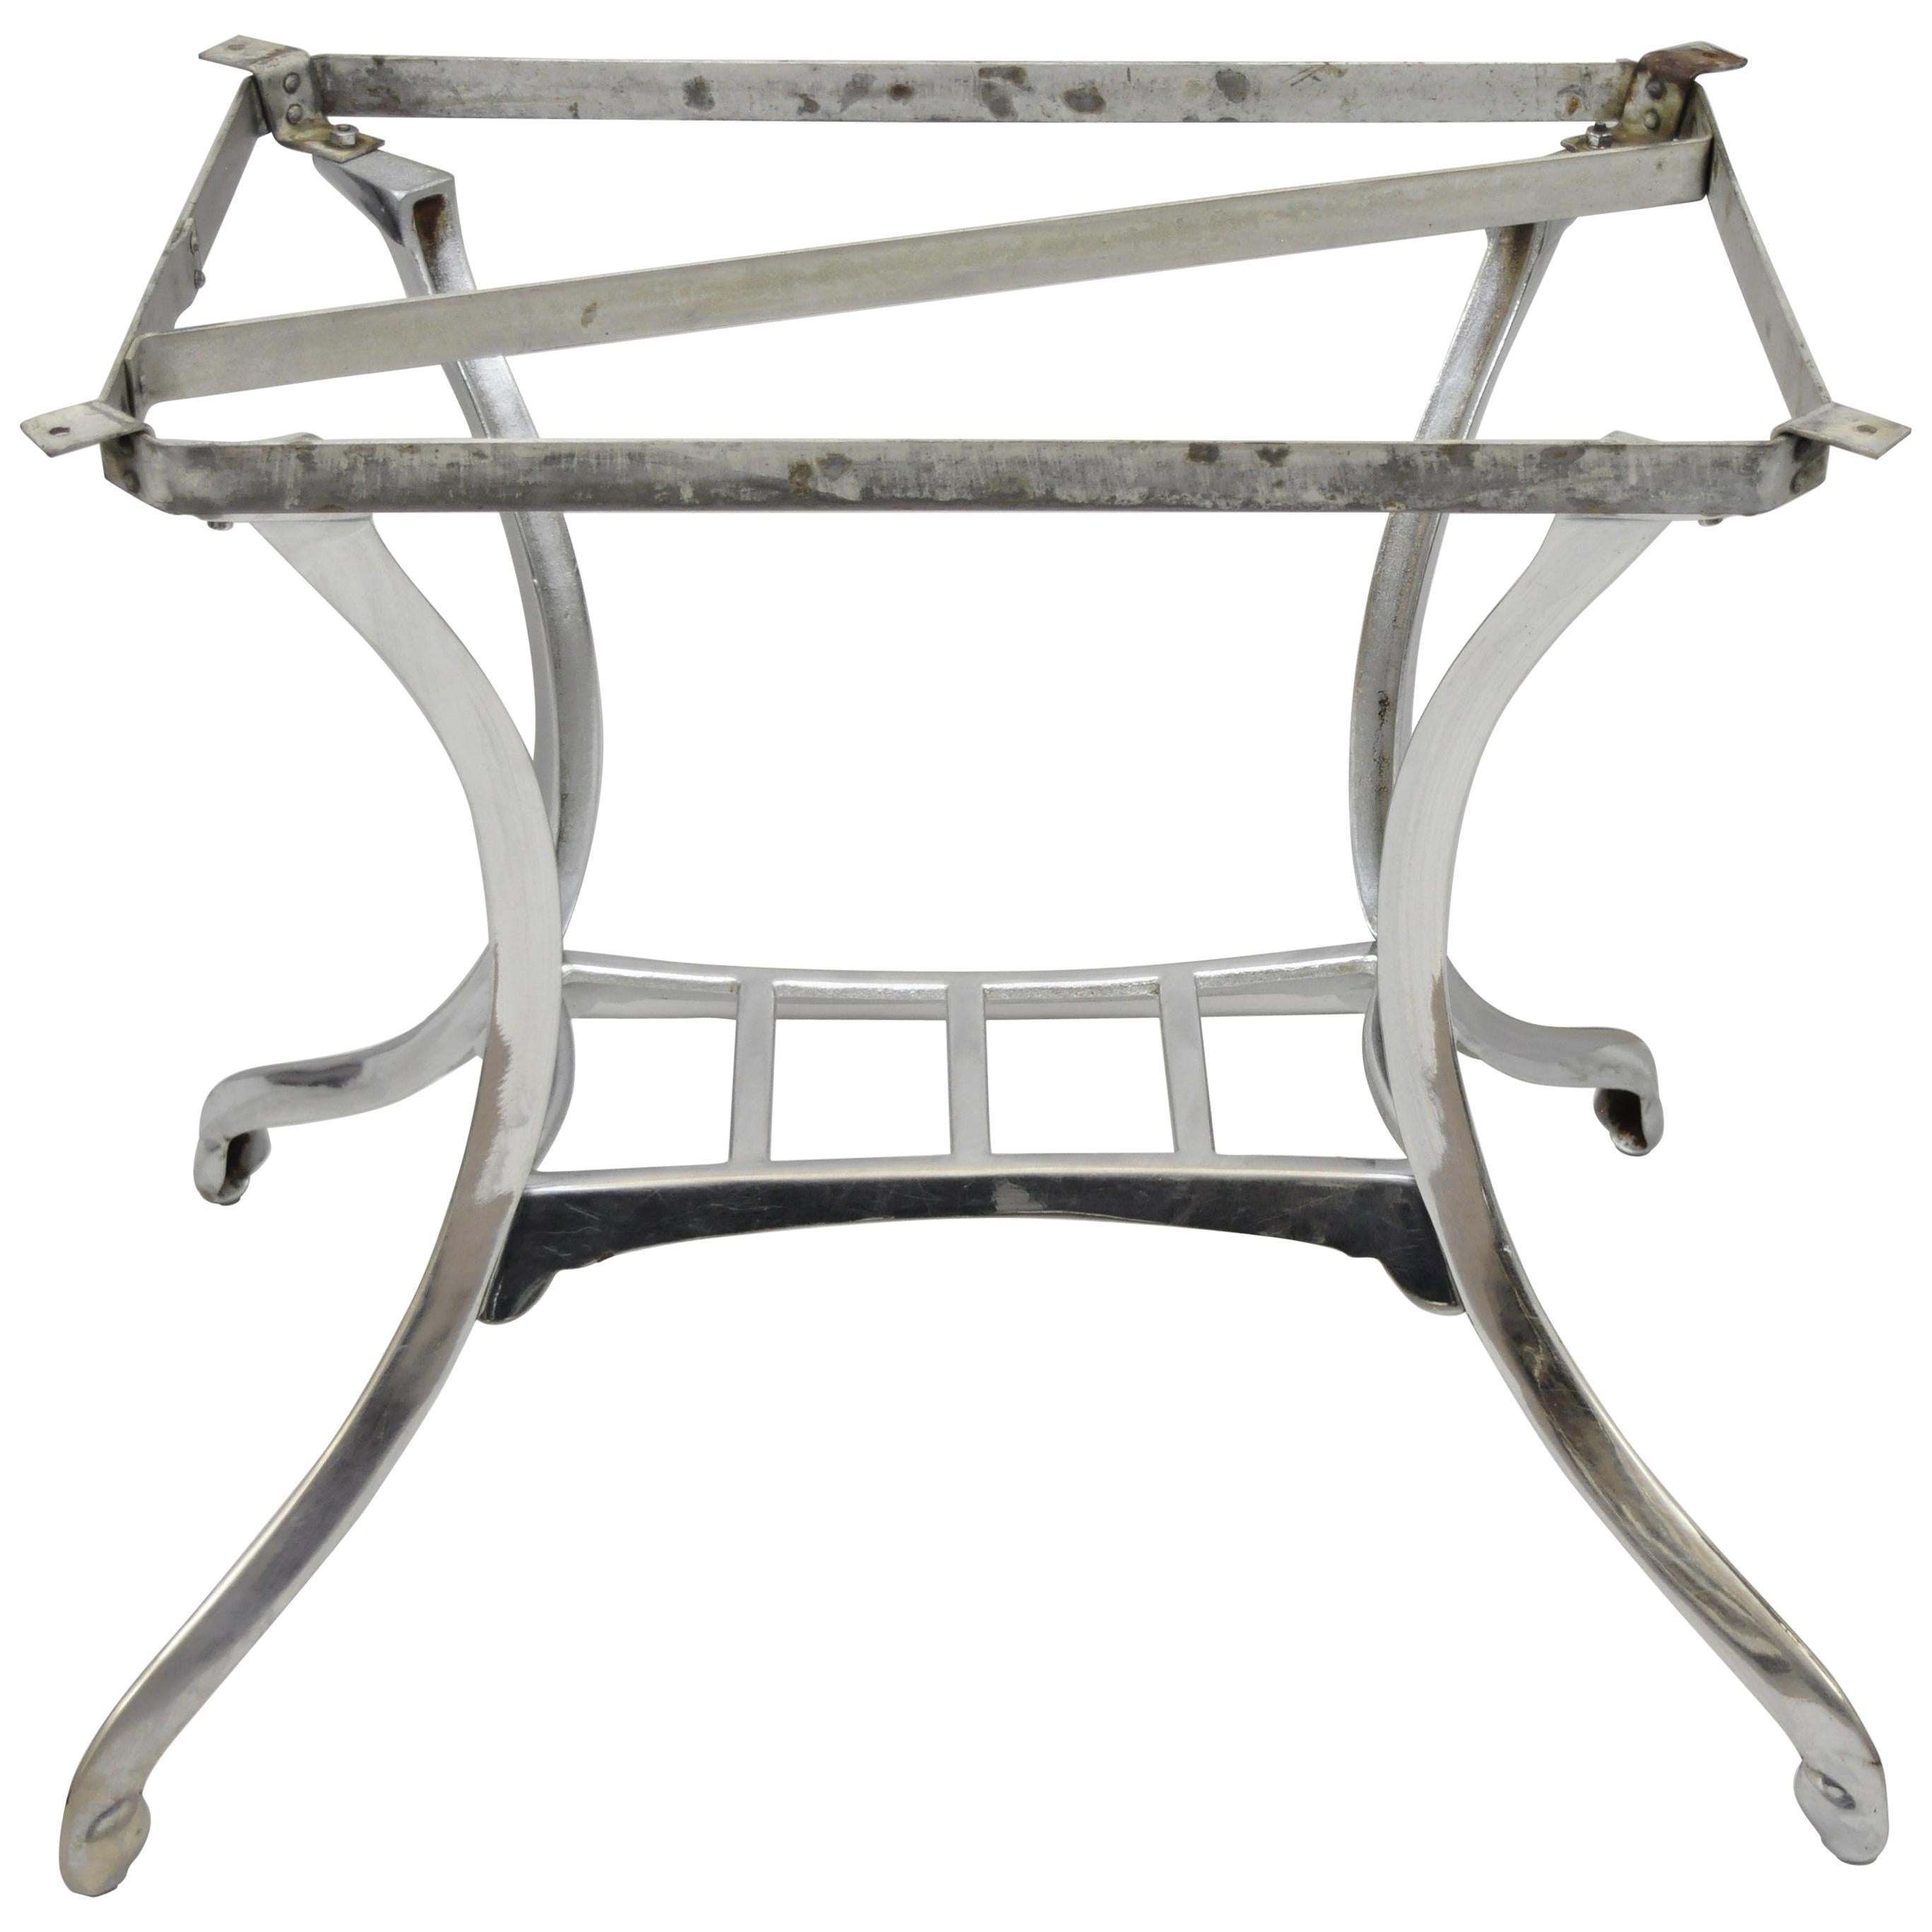 Art Deco Polished Steel Sculptural Dining Table Base Chicago by HDW Foundry Co.